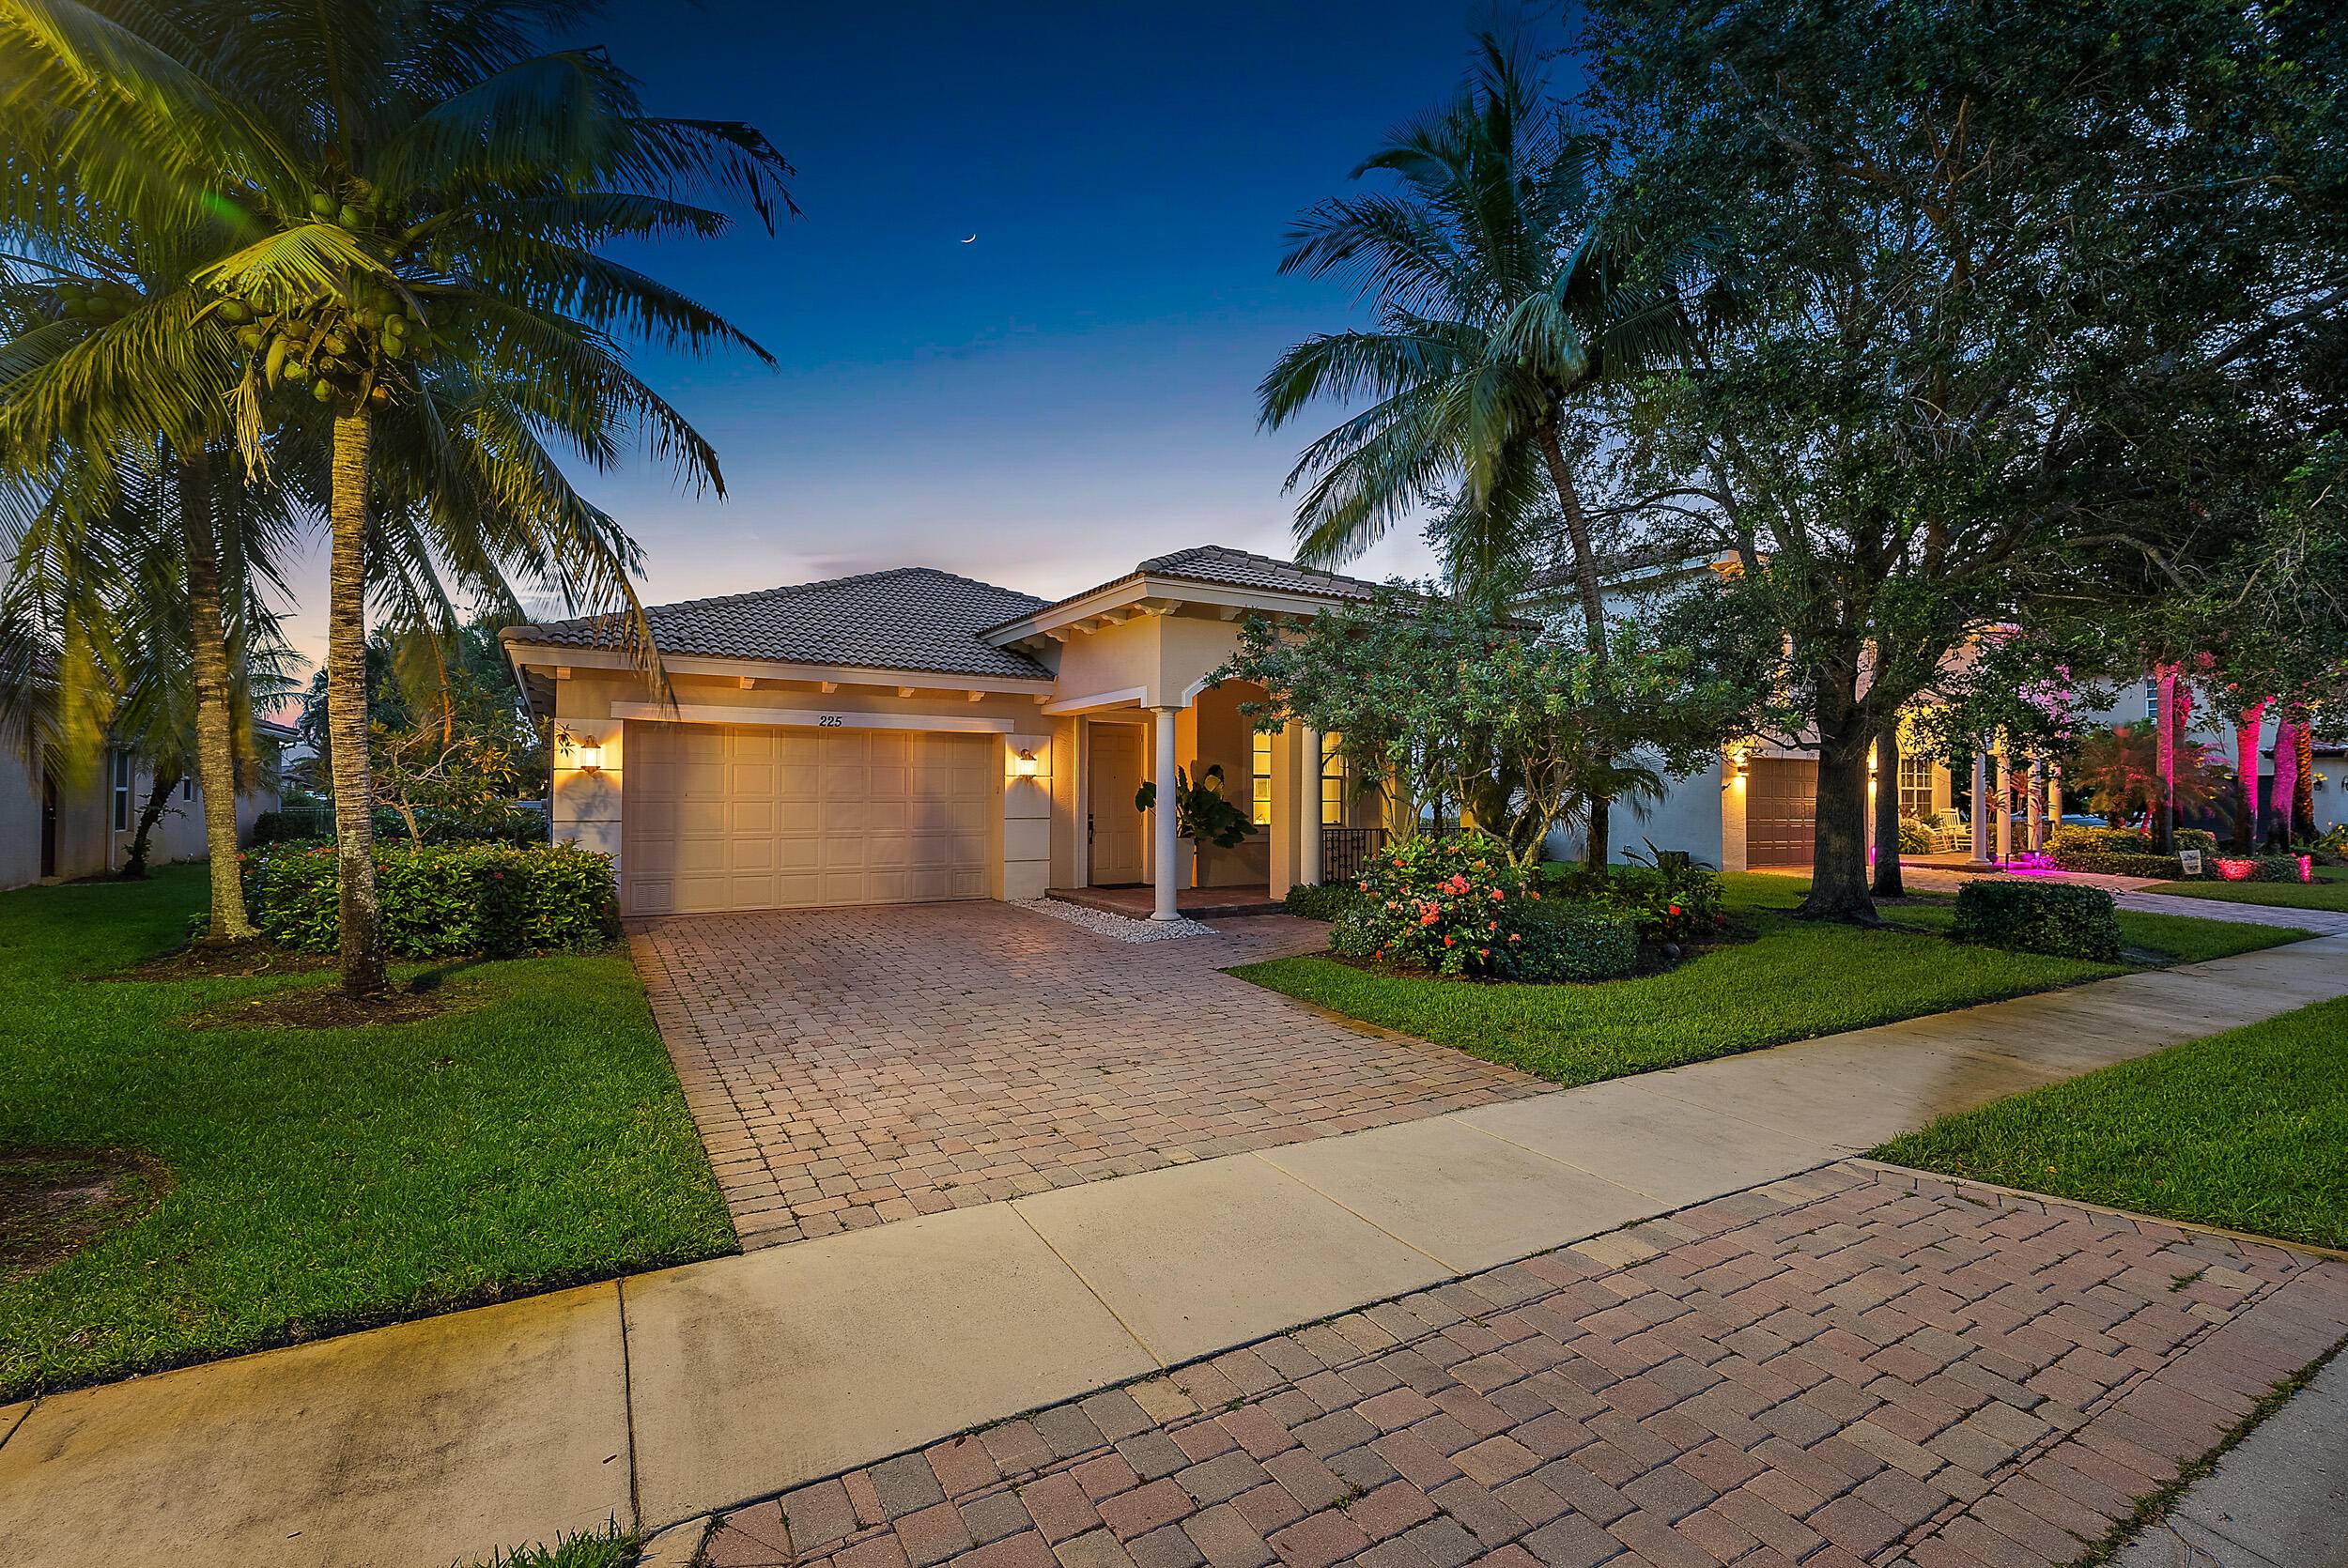 Have you been searching for the perfect CBS pool waterfront home to hit the market in the highly sought after Rialto community of Jupiter ?